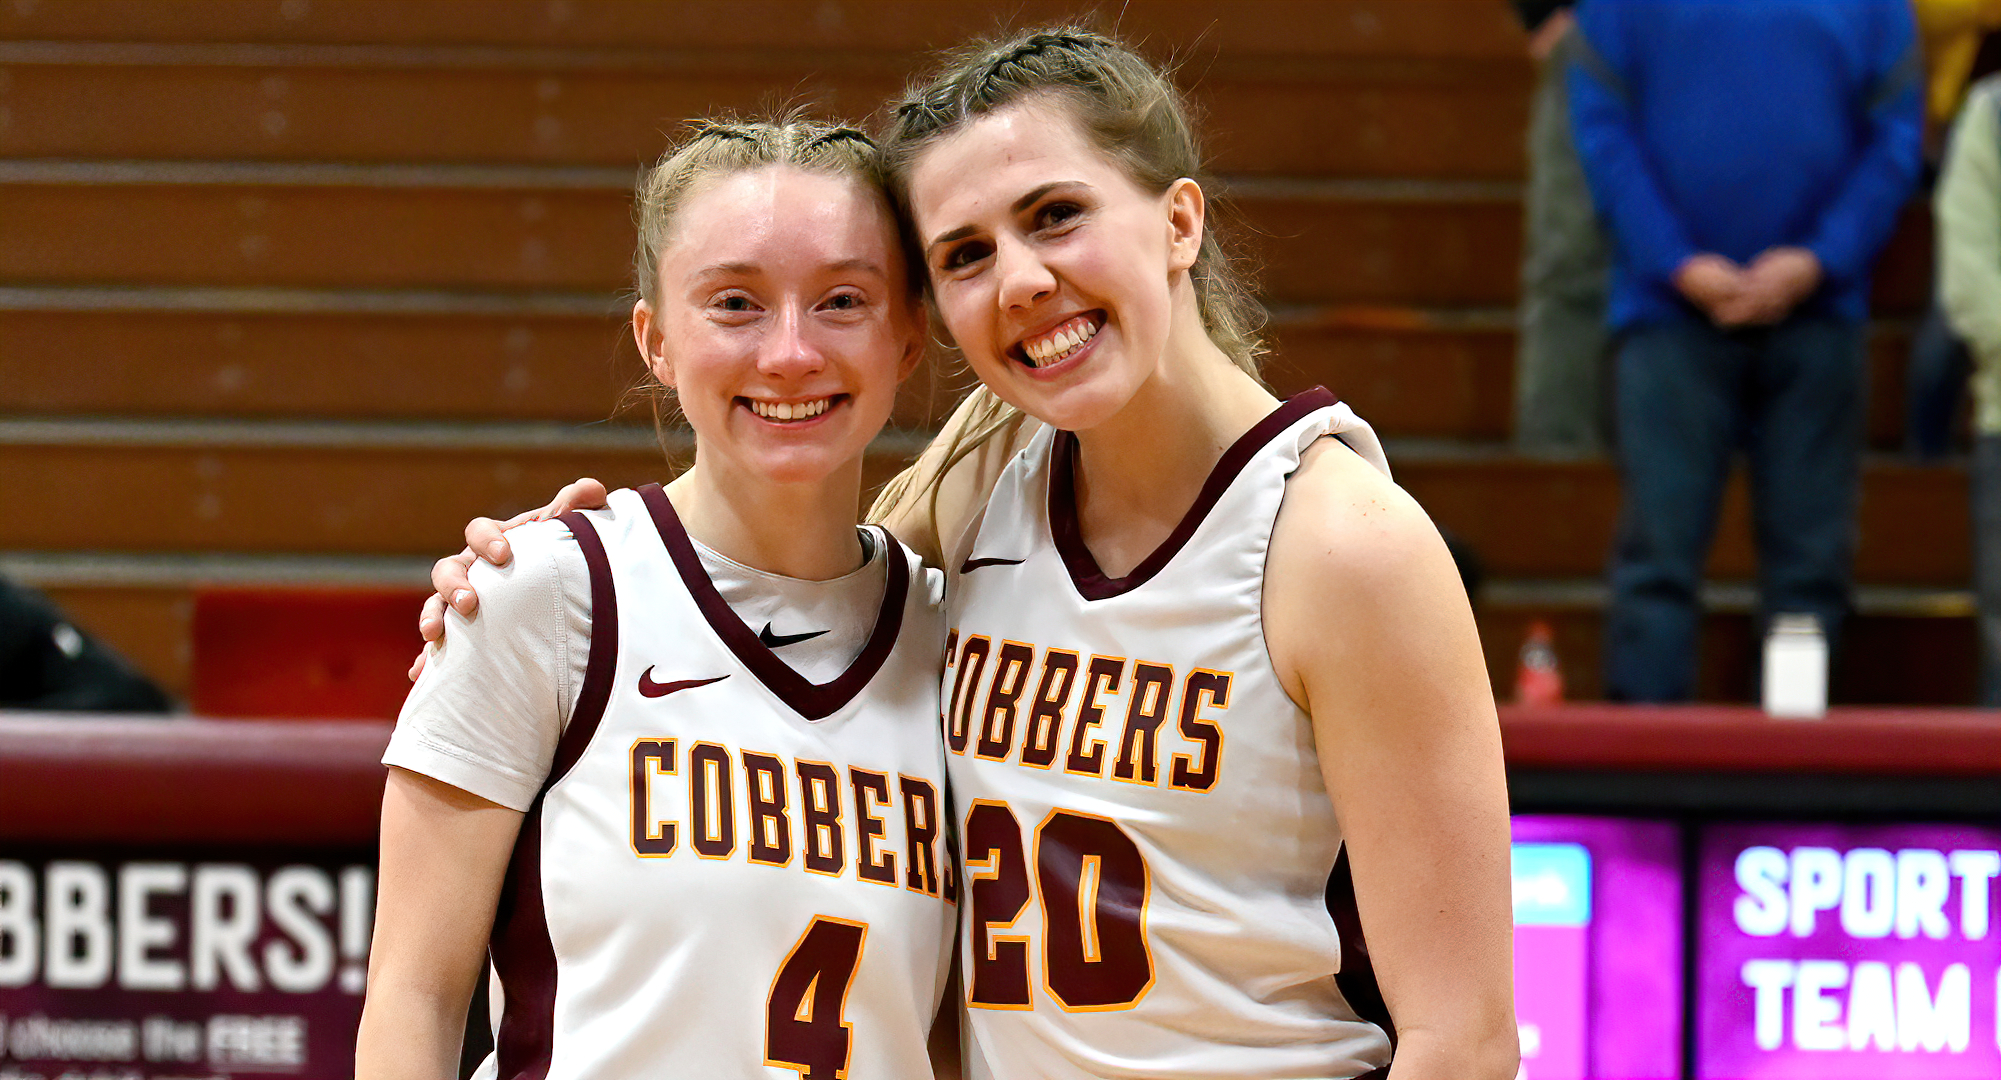 Cobber seniors Maddie Guler (L) and Emily Beseman were honored at halftime of the annual Senior Celebration Game.